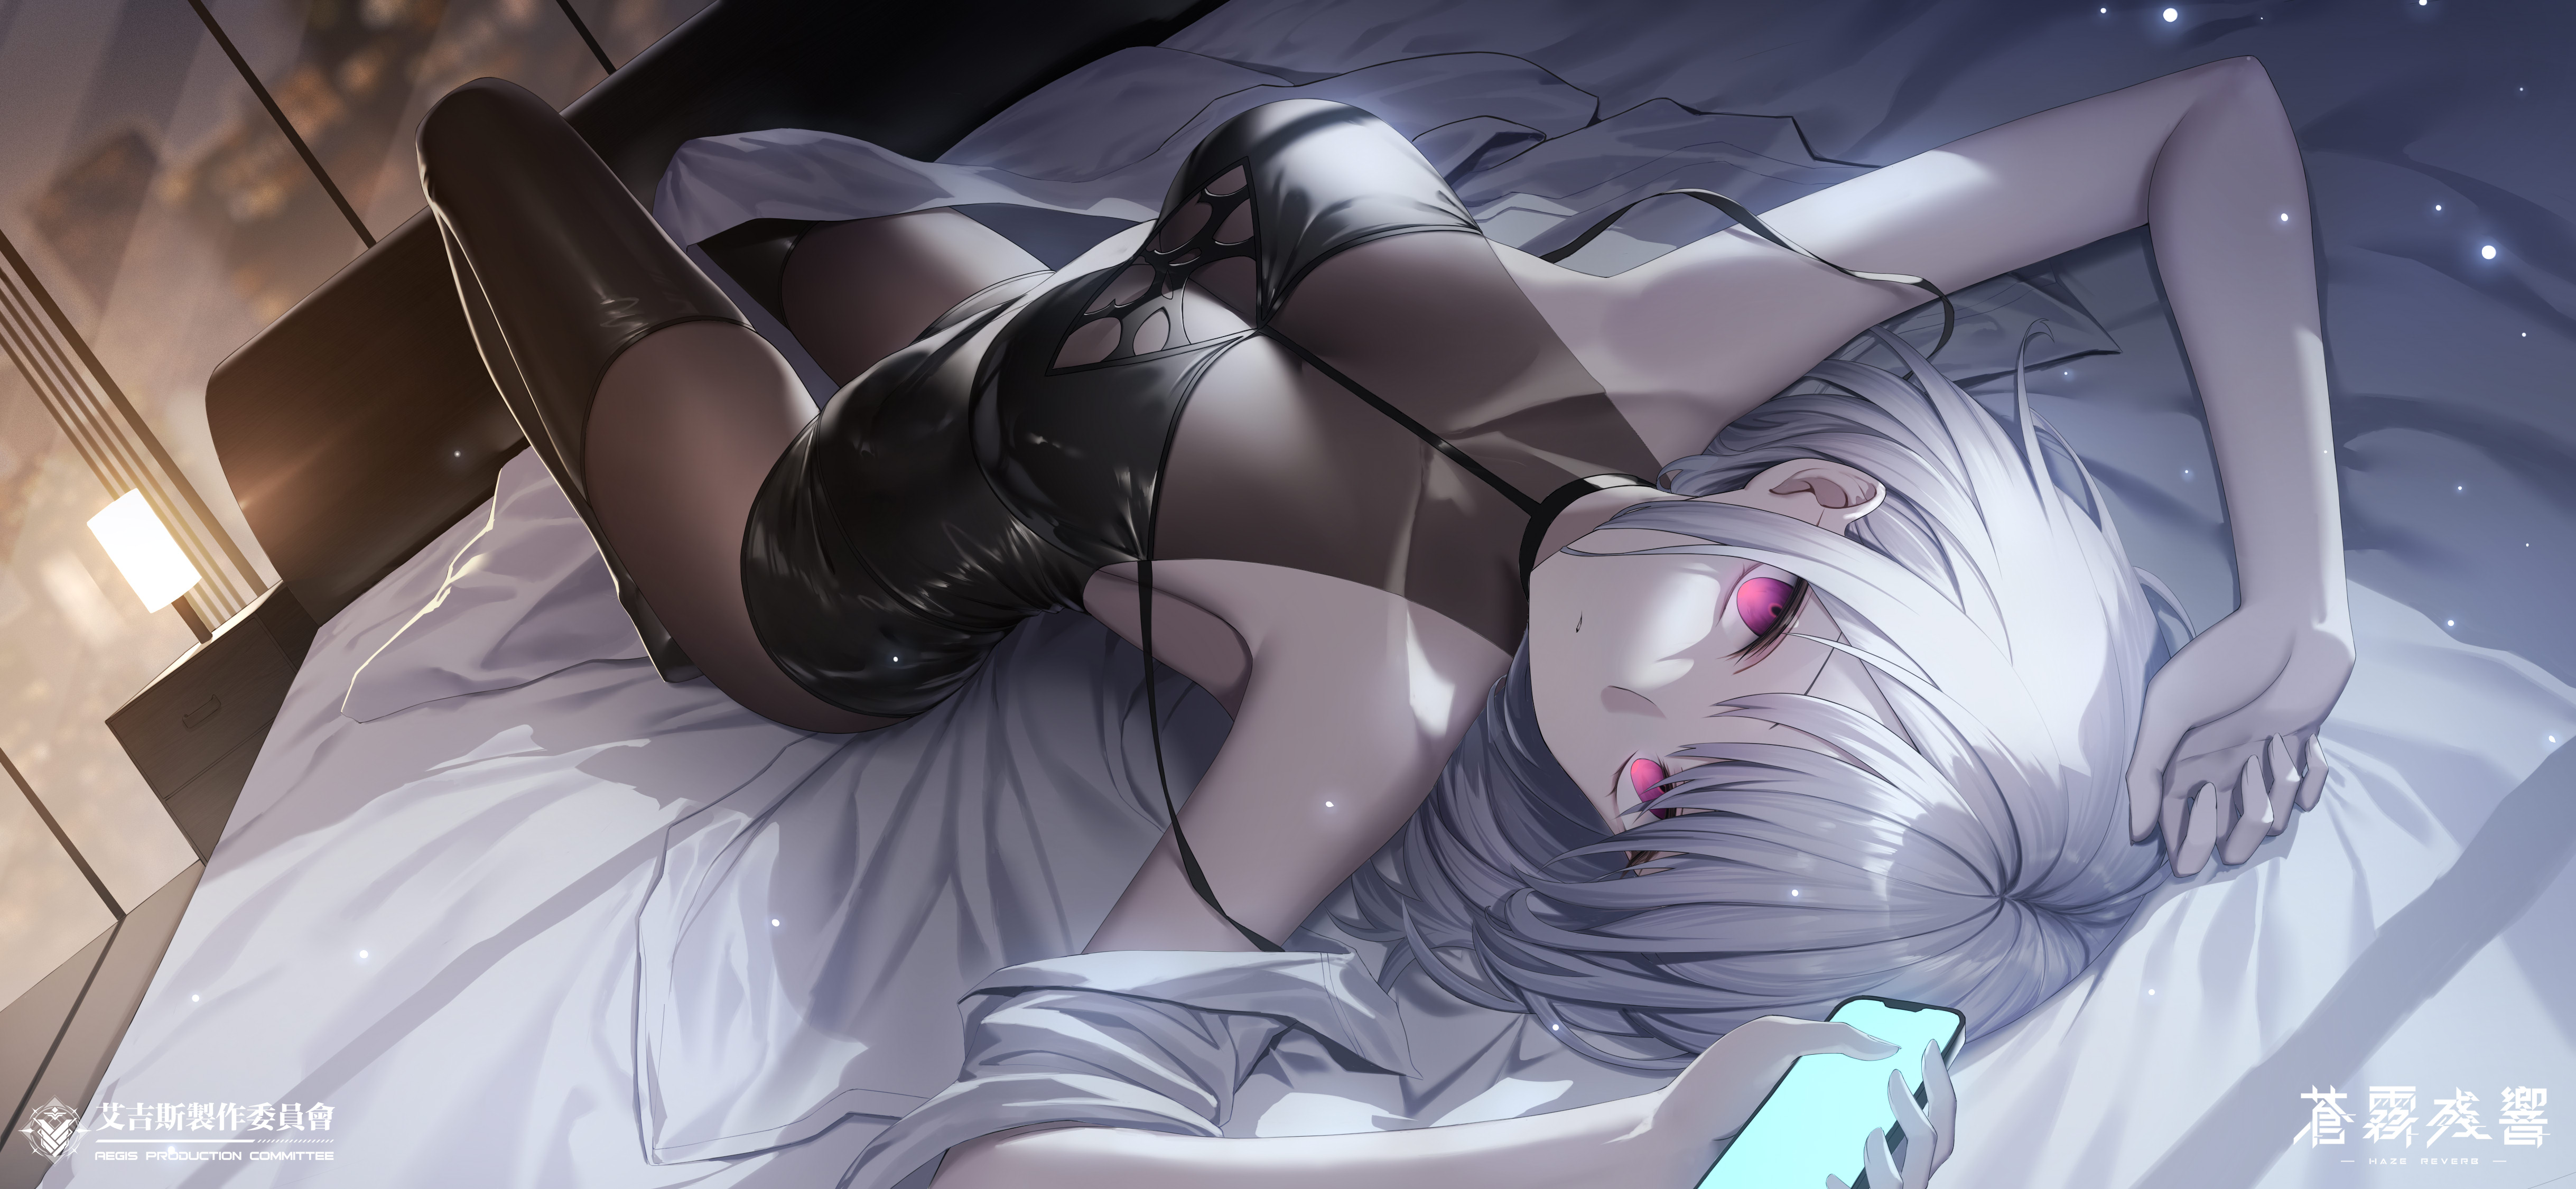 Anime 4875x2250 Haze/Reverb lying down lying on back short hair white hair bodystocking looking at viewer phone stockings black stockings black dress tight dress women indoors latex boobs black thigh highs Ishiroroy watermarked pink eyes glowing eyes armpits in bedroom cellphone sleeveless minidress arched back black minidress dress depth of field pantyhose blurry background lamp cityscape closed mouth anime girls anime